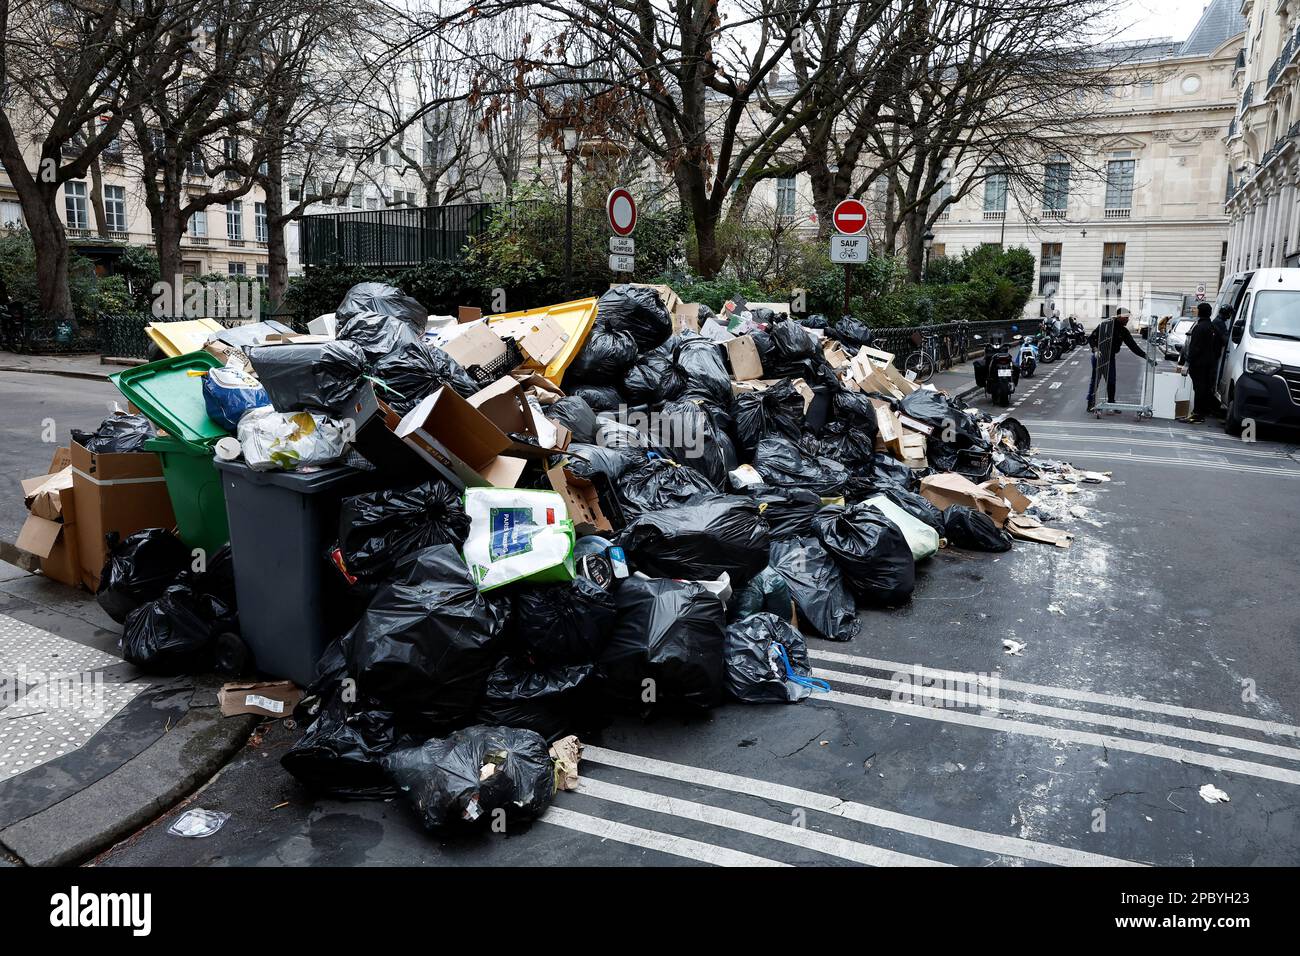 A view of a street where garbage cans are overflowing, as garbage has not been collected, in Paris, France March 13, 2023. REUTERS/Benoit Tessier Stock Photo